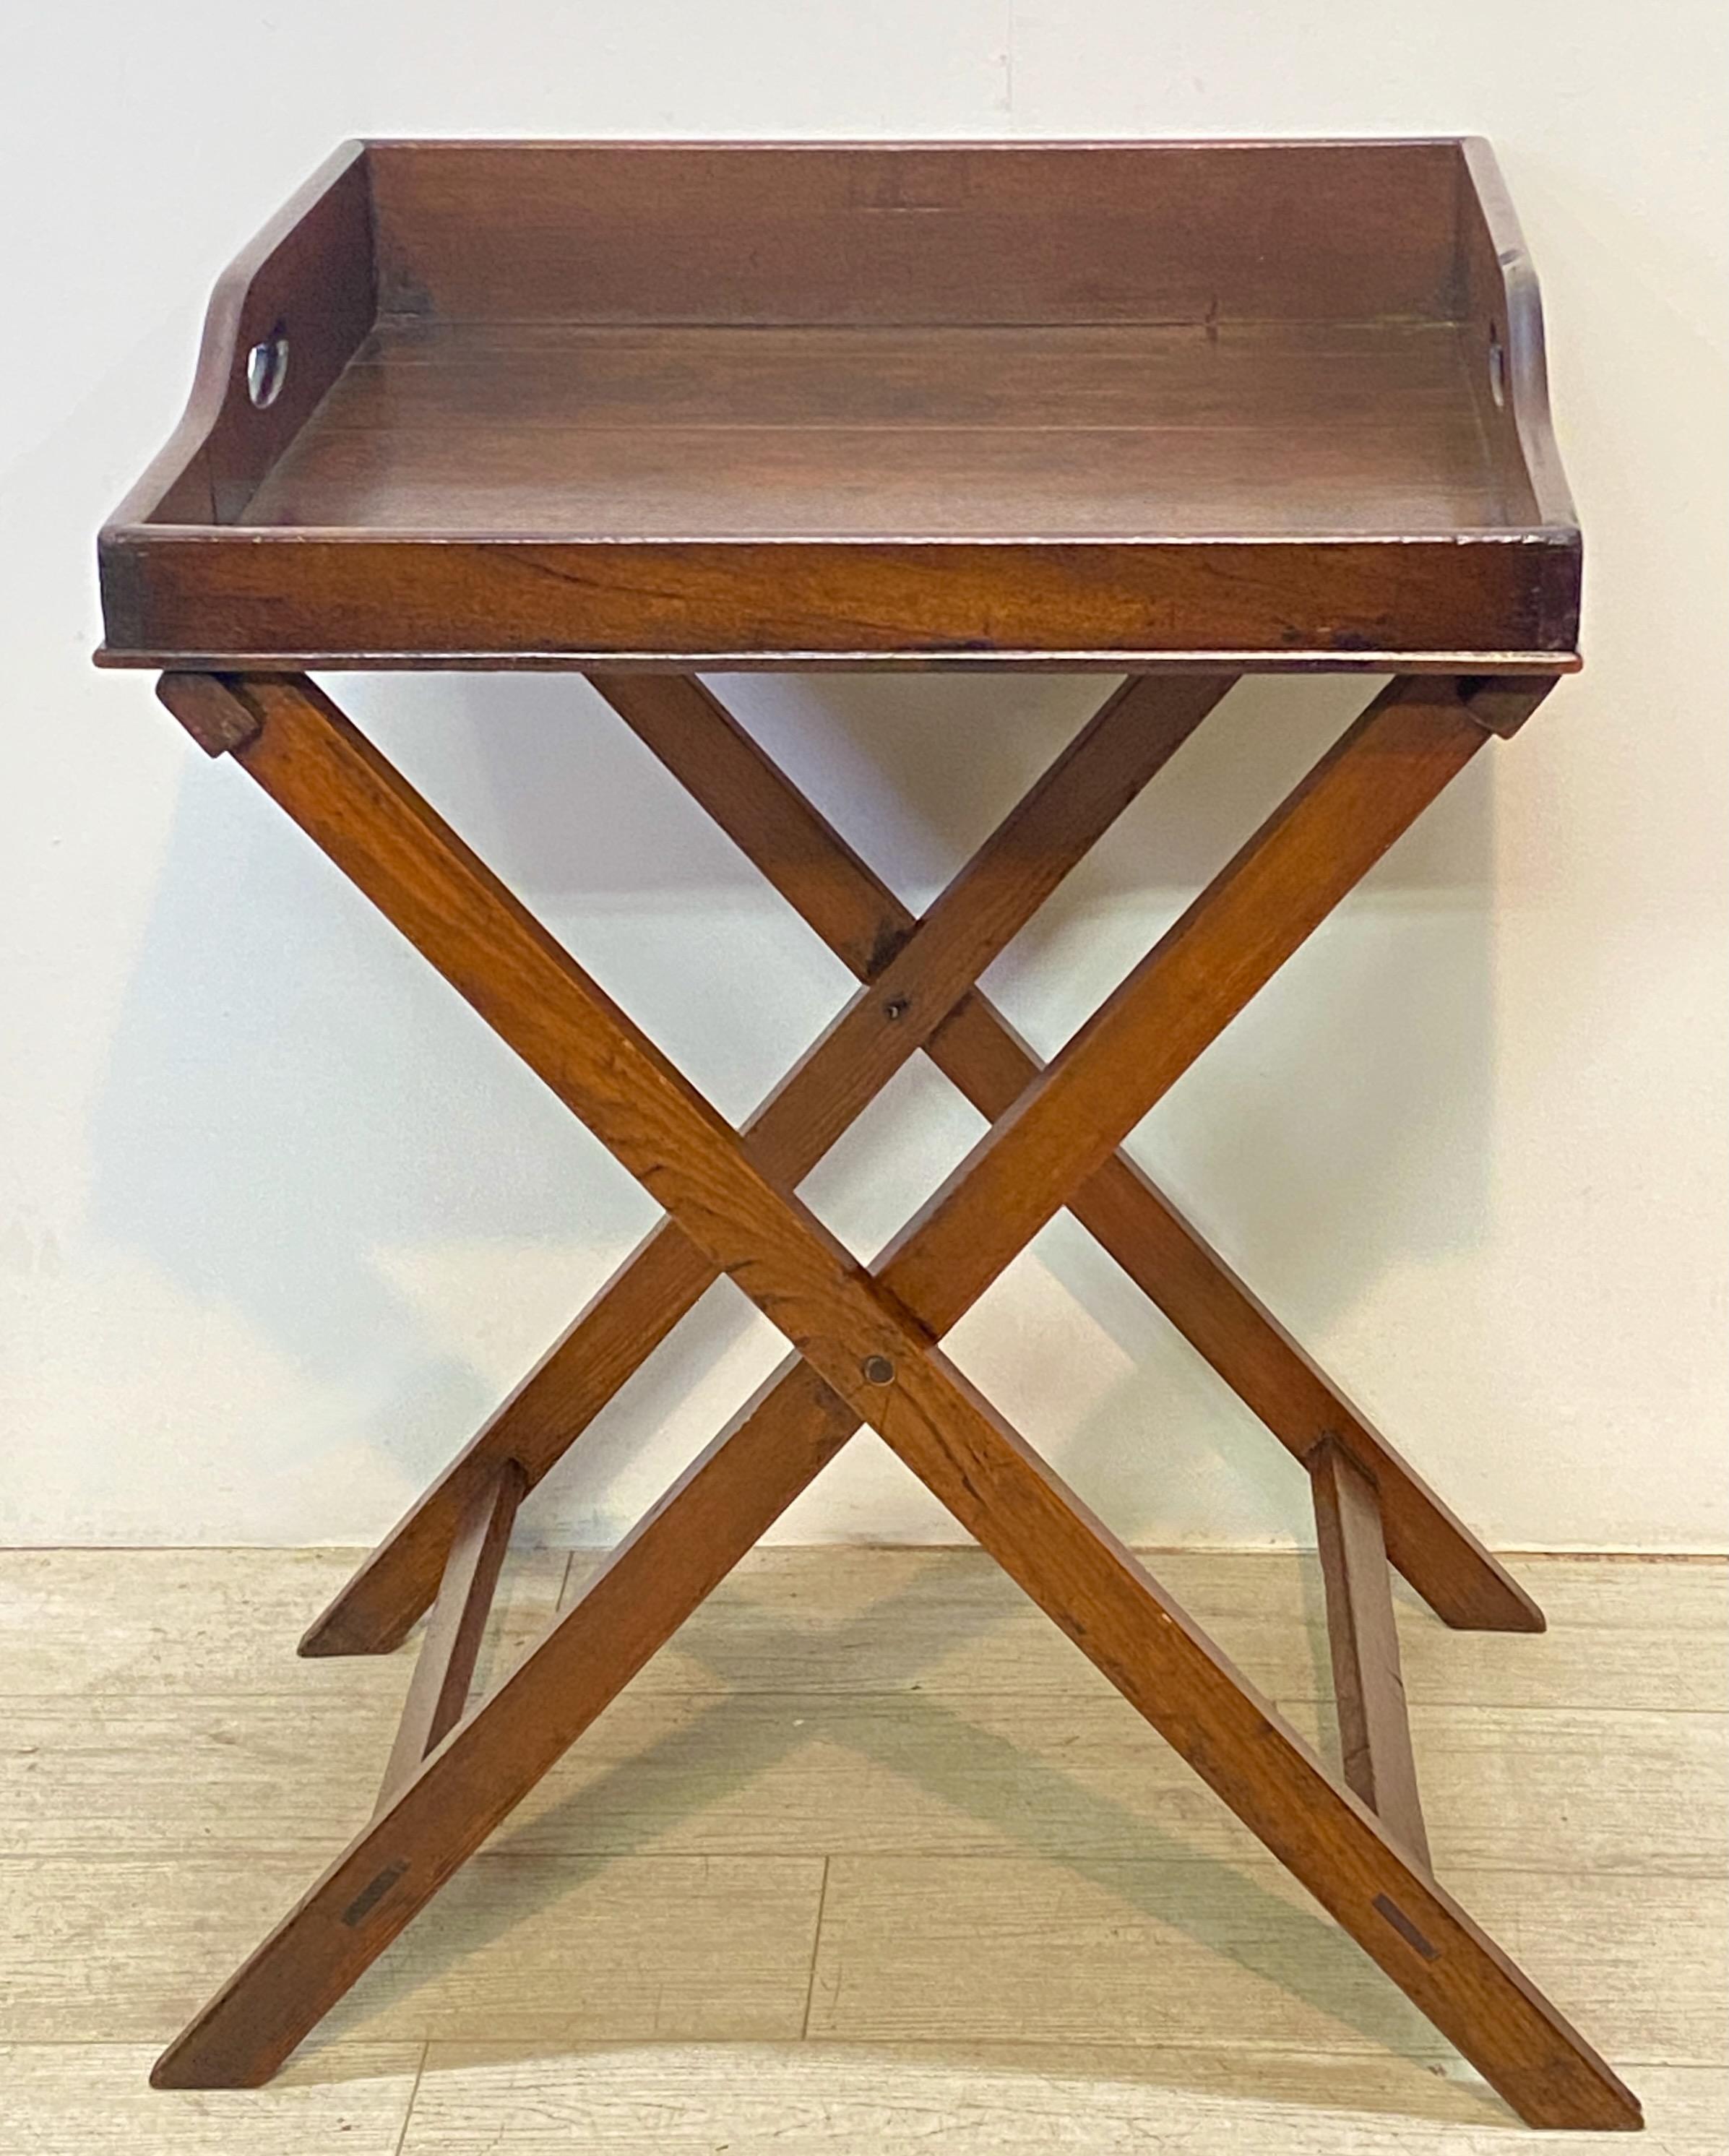 Early 19th century Regency George III period mahogany butler's tray on folding stand.
Unusual square shape tray as these are mostly rectangle in shape.
Beautiful old patina with expected signs of use adding to its character.
These always look